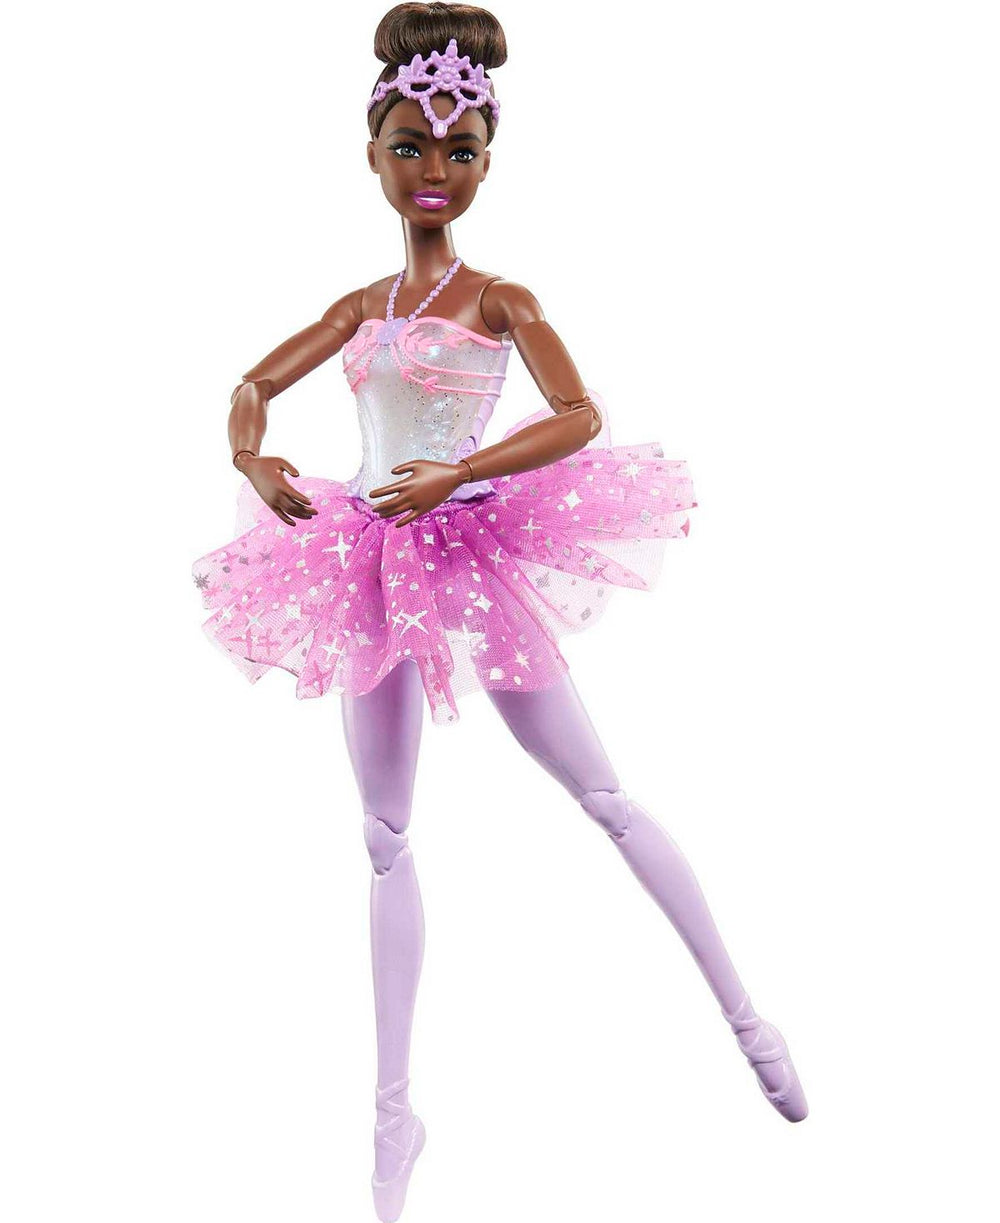 Barbie Dreamtopia Twinkle Lights Magical Ballerina Doll with Light-Up Feature